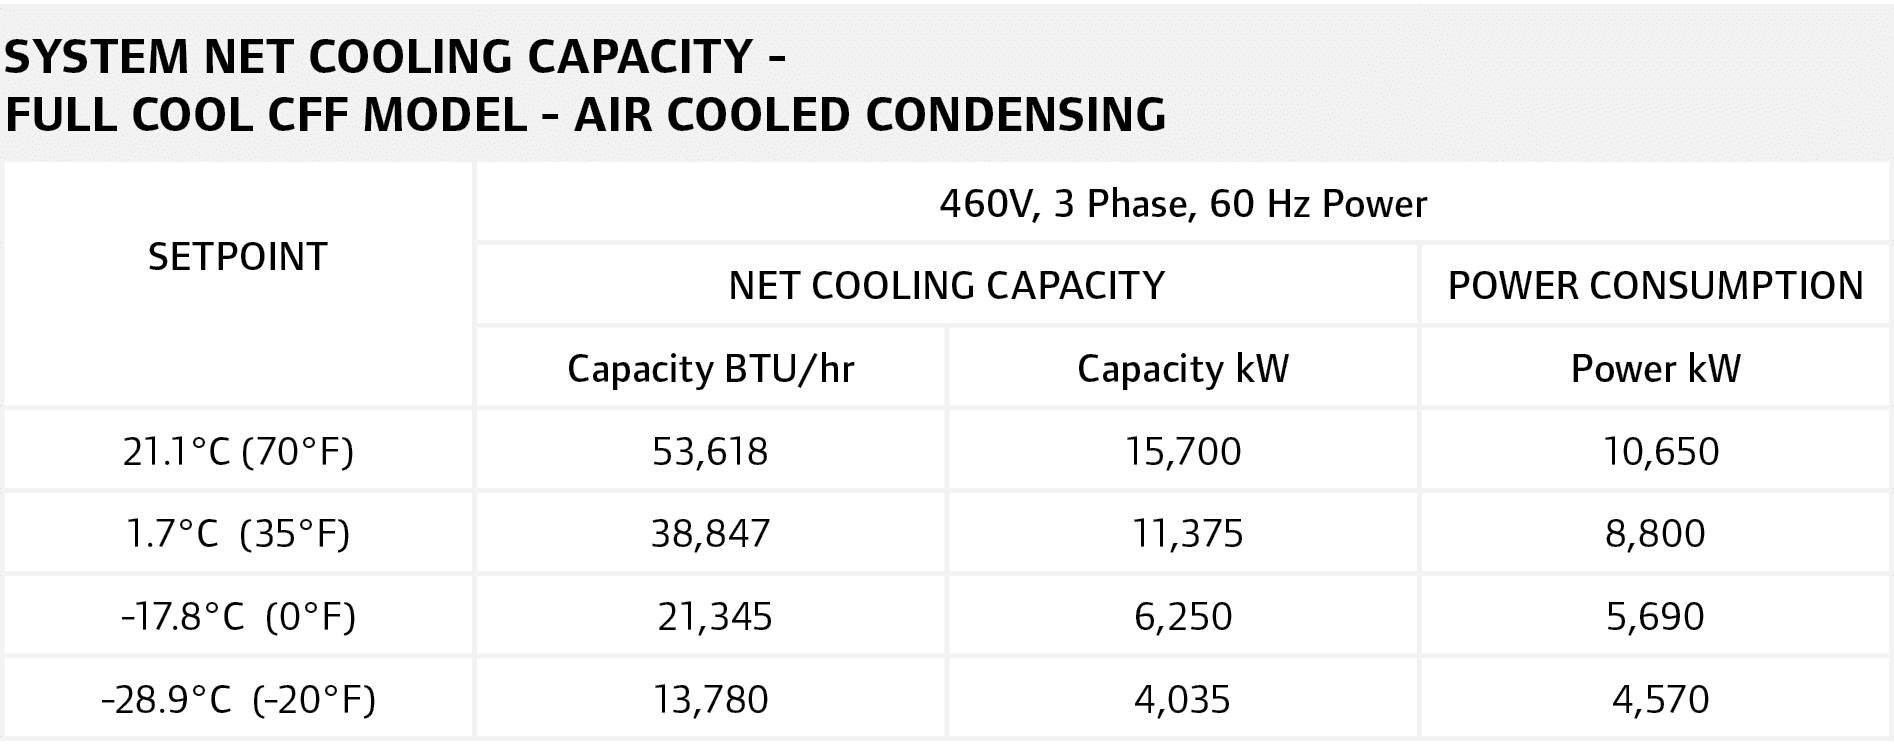 System Net Cooling Capacity - Full Cool CFF Model - Air Cooled Condensing,Setpoint,460V, 3 Phase, 60 Hz Power,Net Coo...